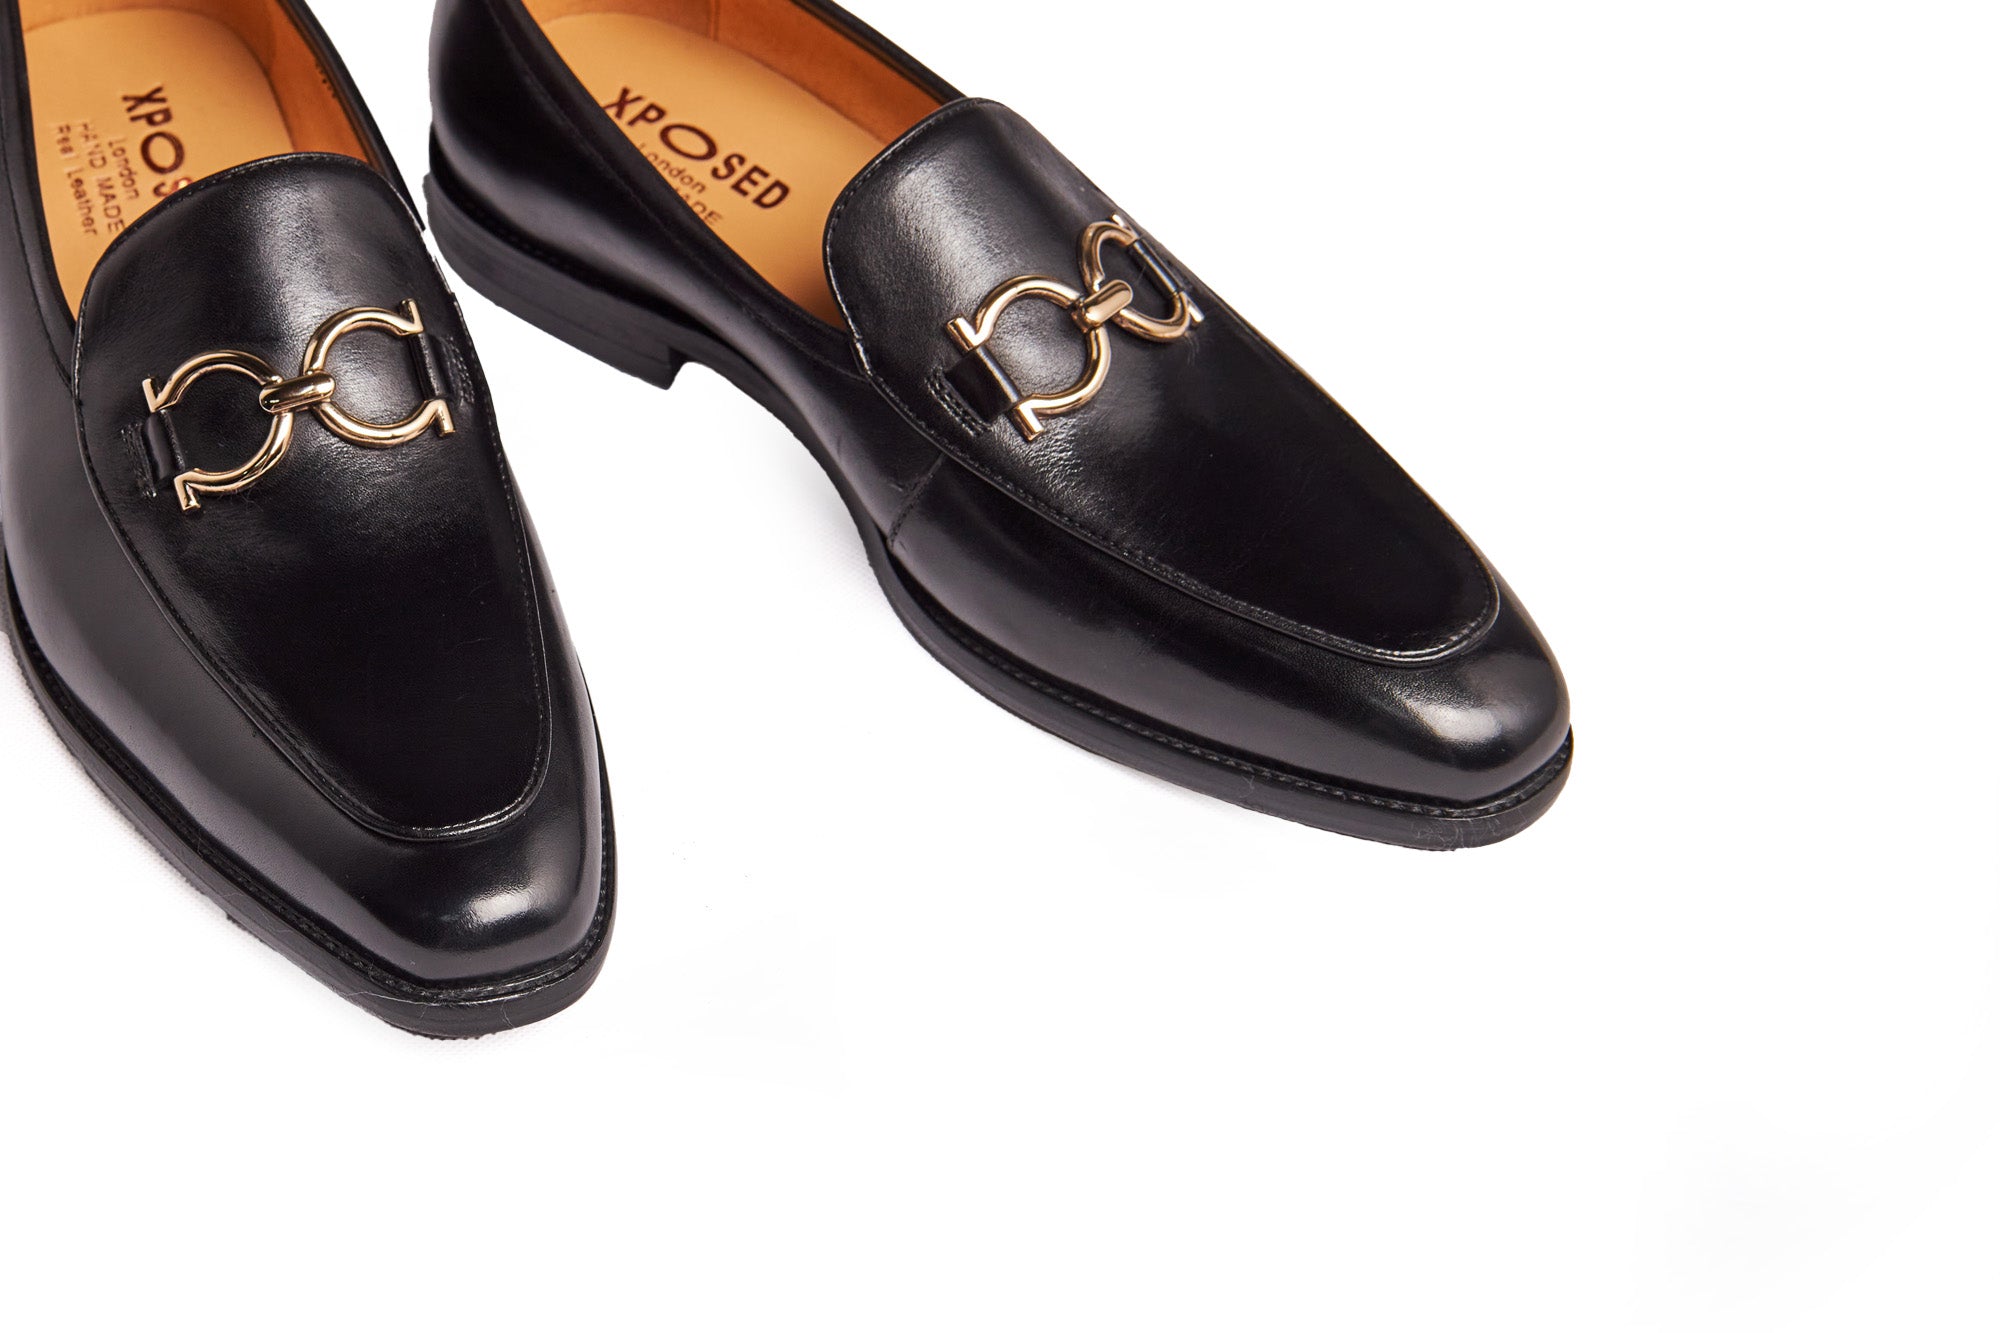 GOLD BUCKLE LOAFERS IN BLACK